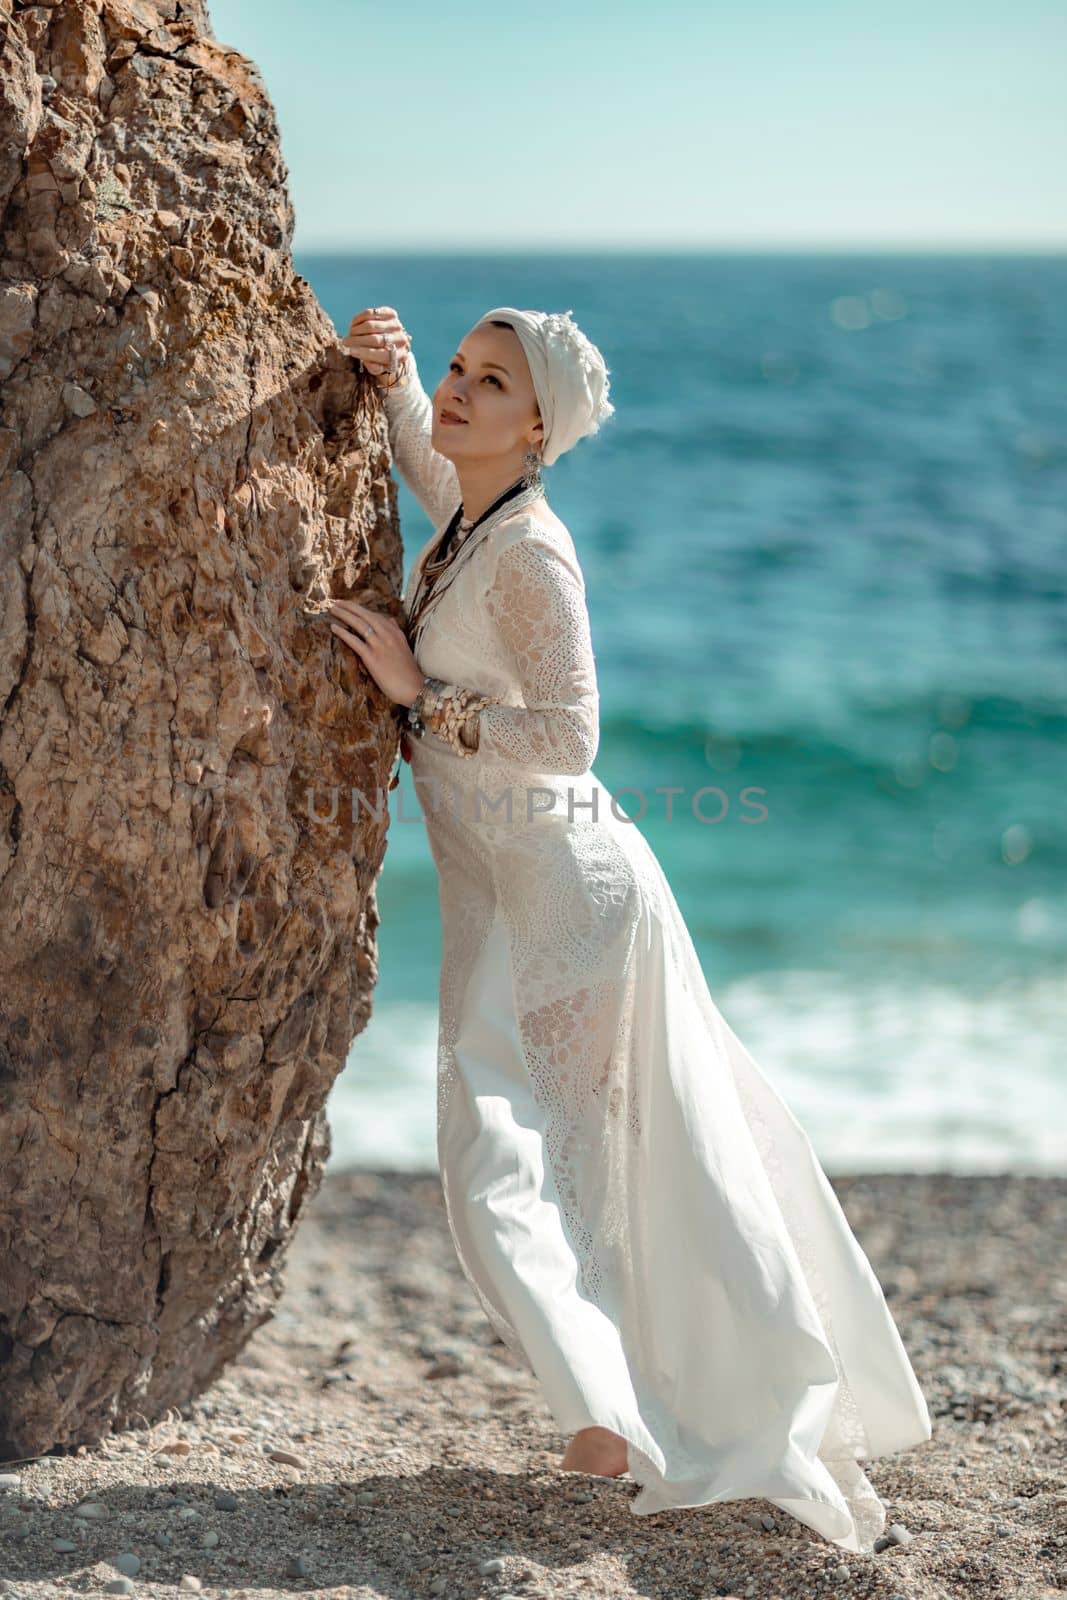 Woman white dress sea stones rocks.Middle-aged woman looks good with blond hair, boho style in a white long dress on beach jewelry around her neck and arms